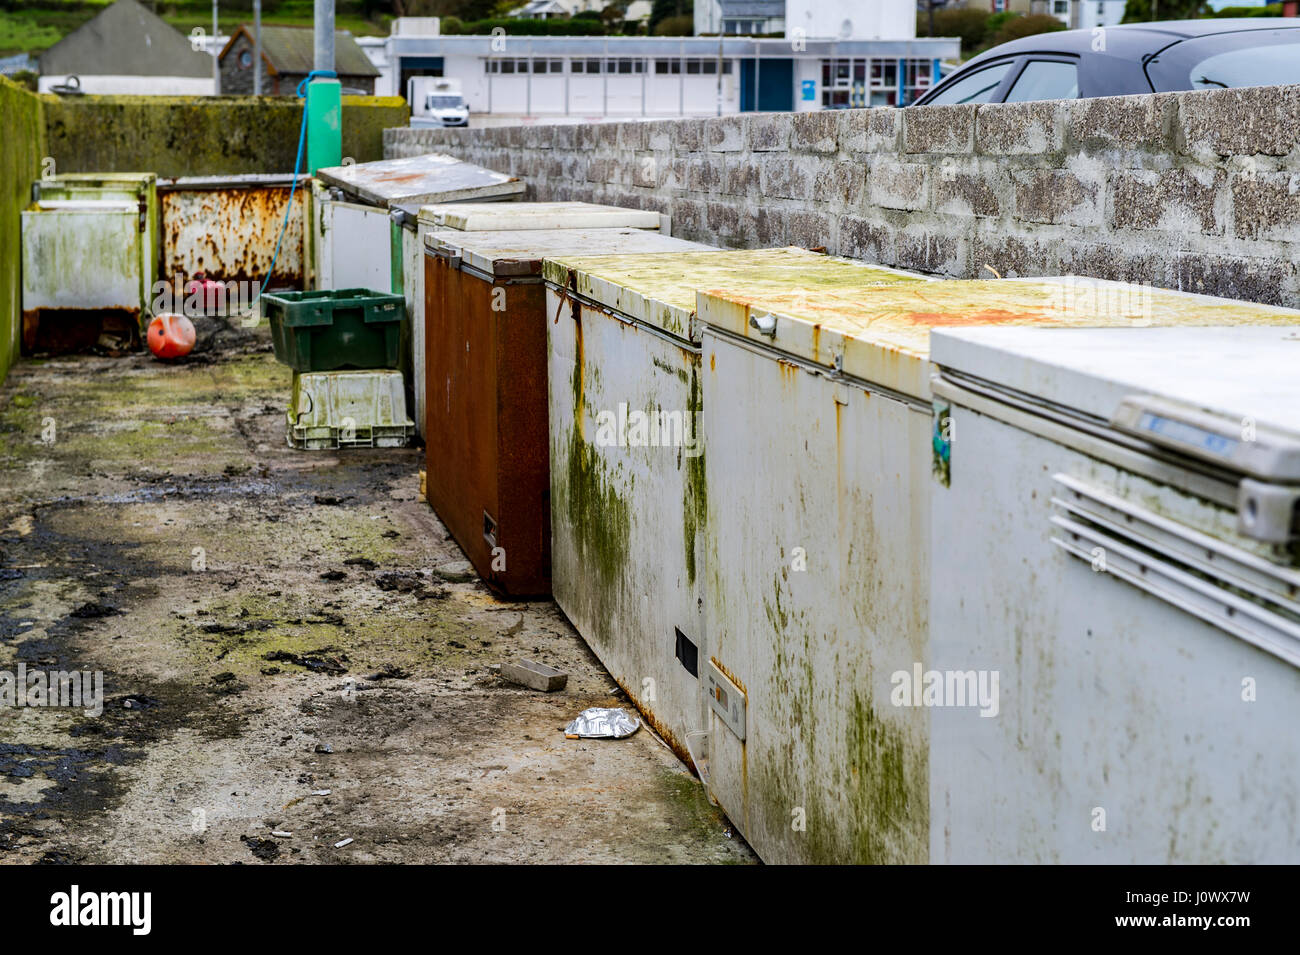 Freezers used to store bait for commercial fishing trawlers on the dock quay pier in Schull, West Cork, Ireland. Stock Photo